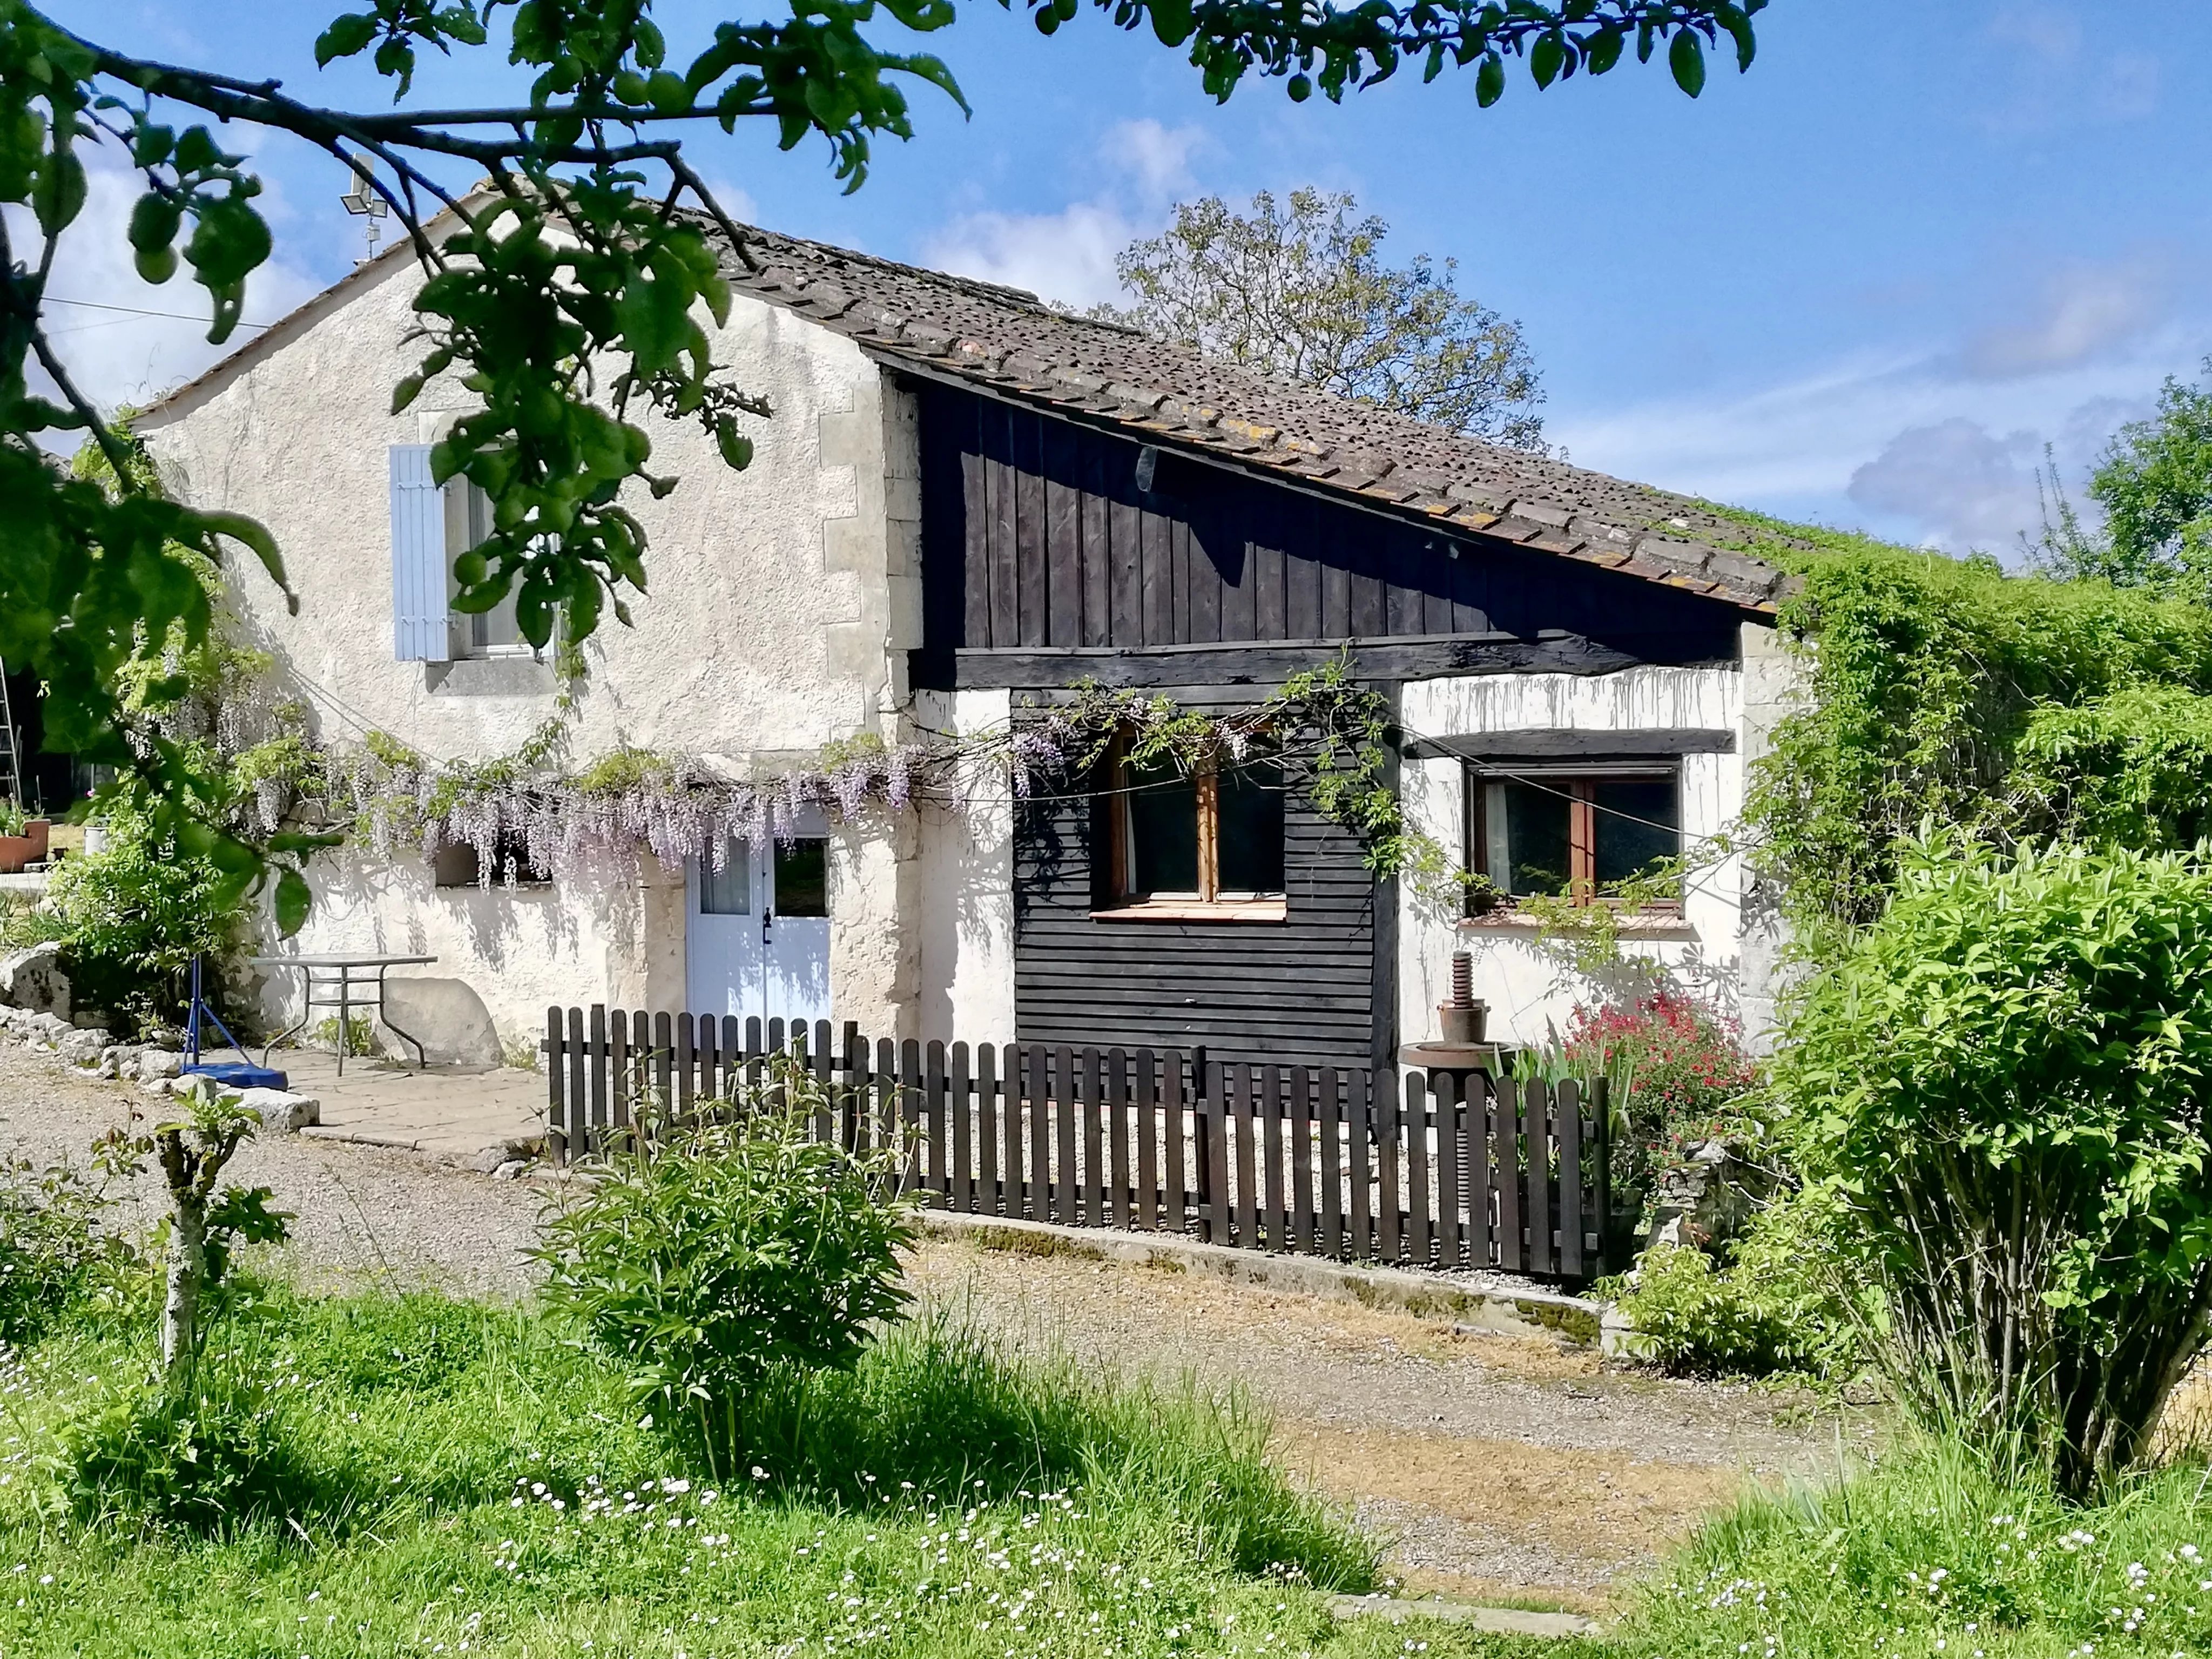 Characterful stone farmhouse including a self contained apartment and a separate cottage